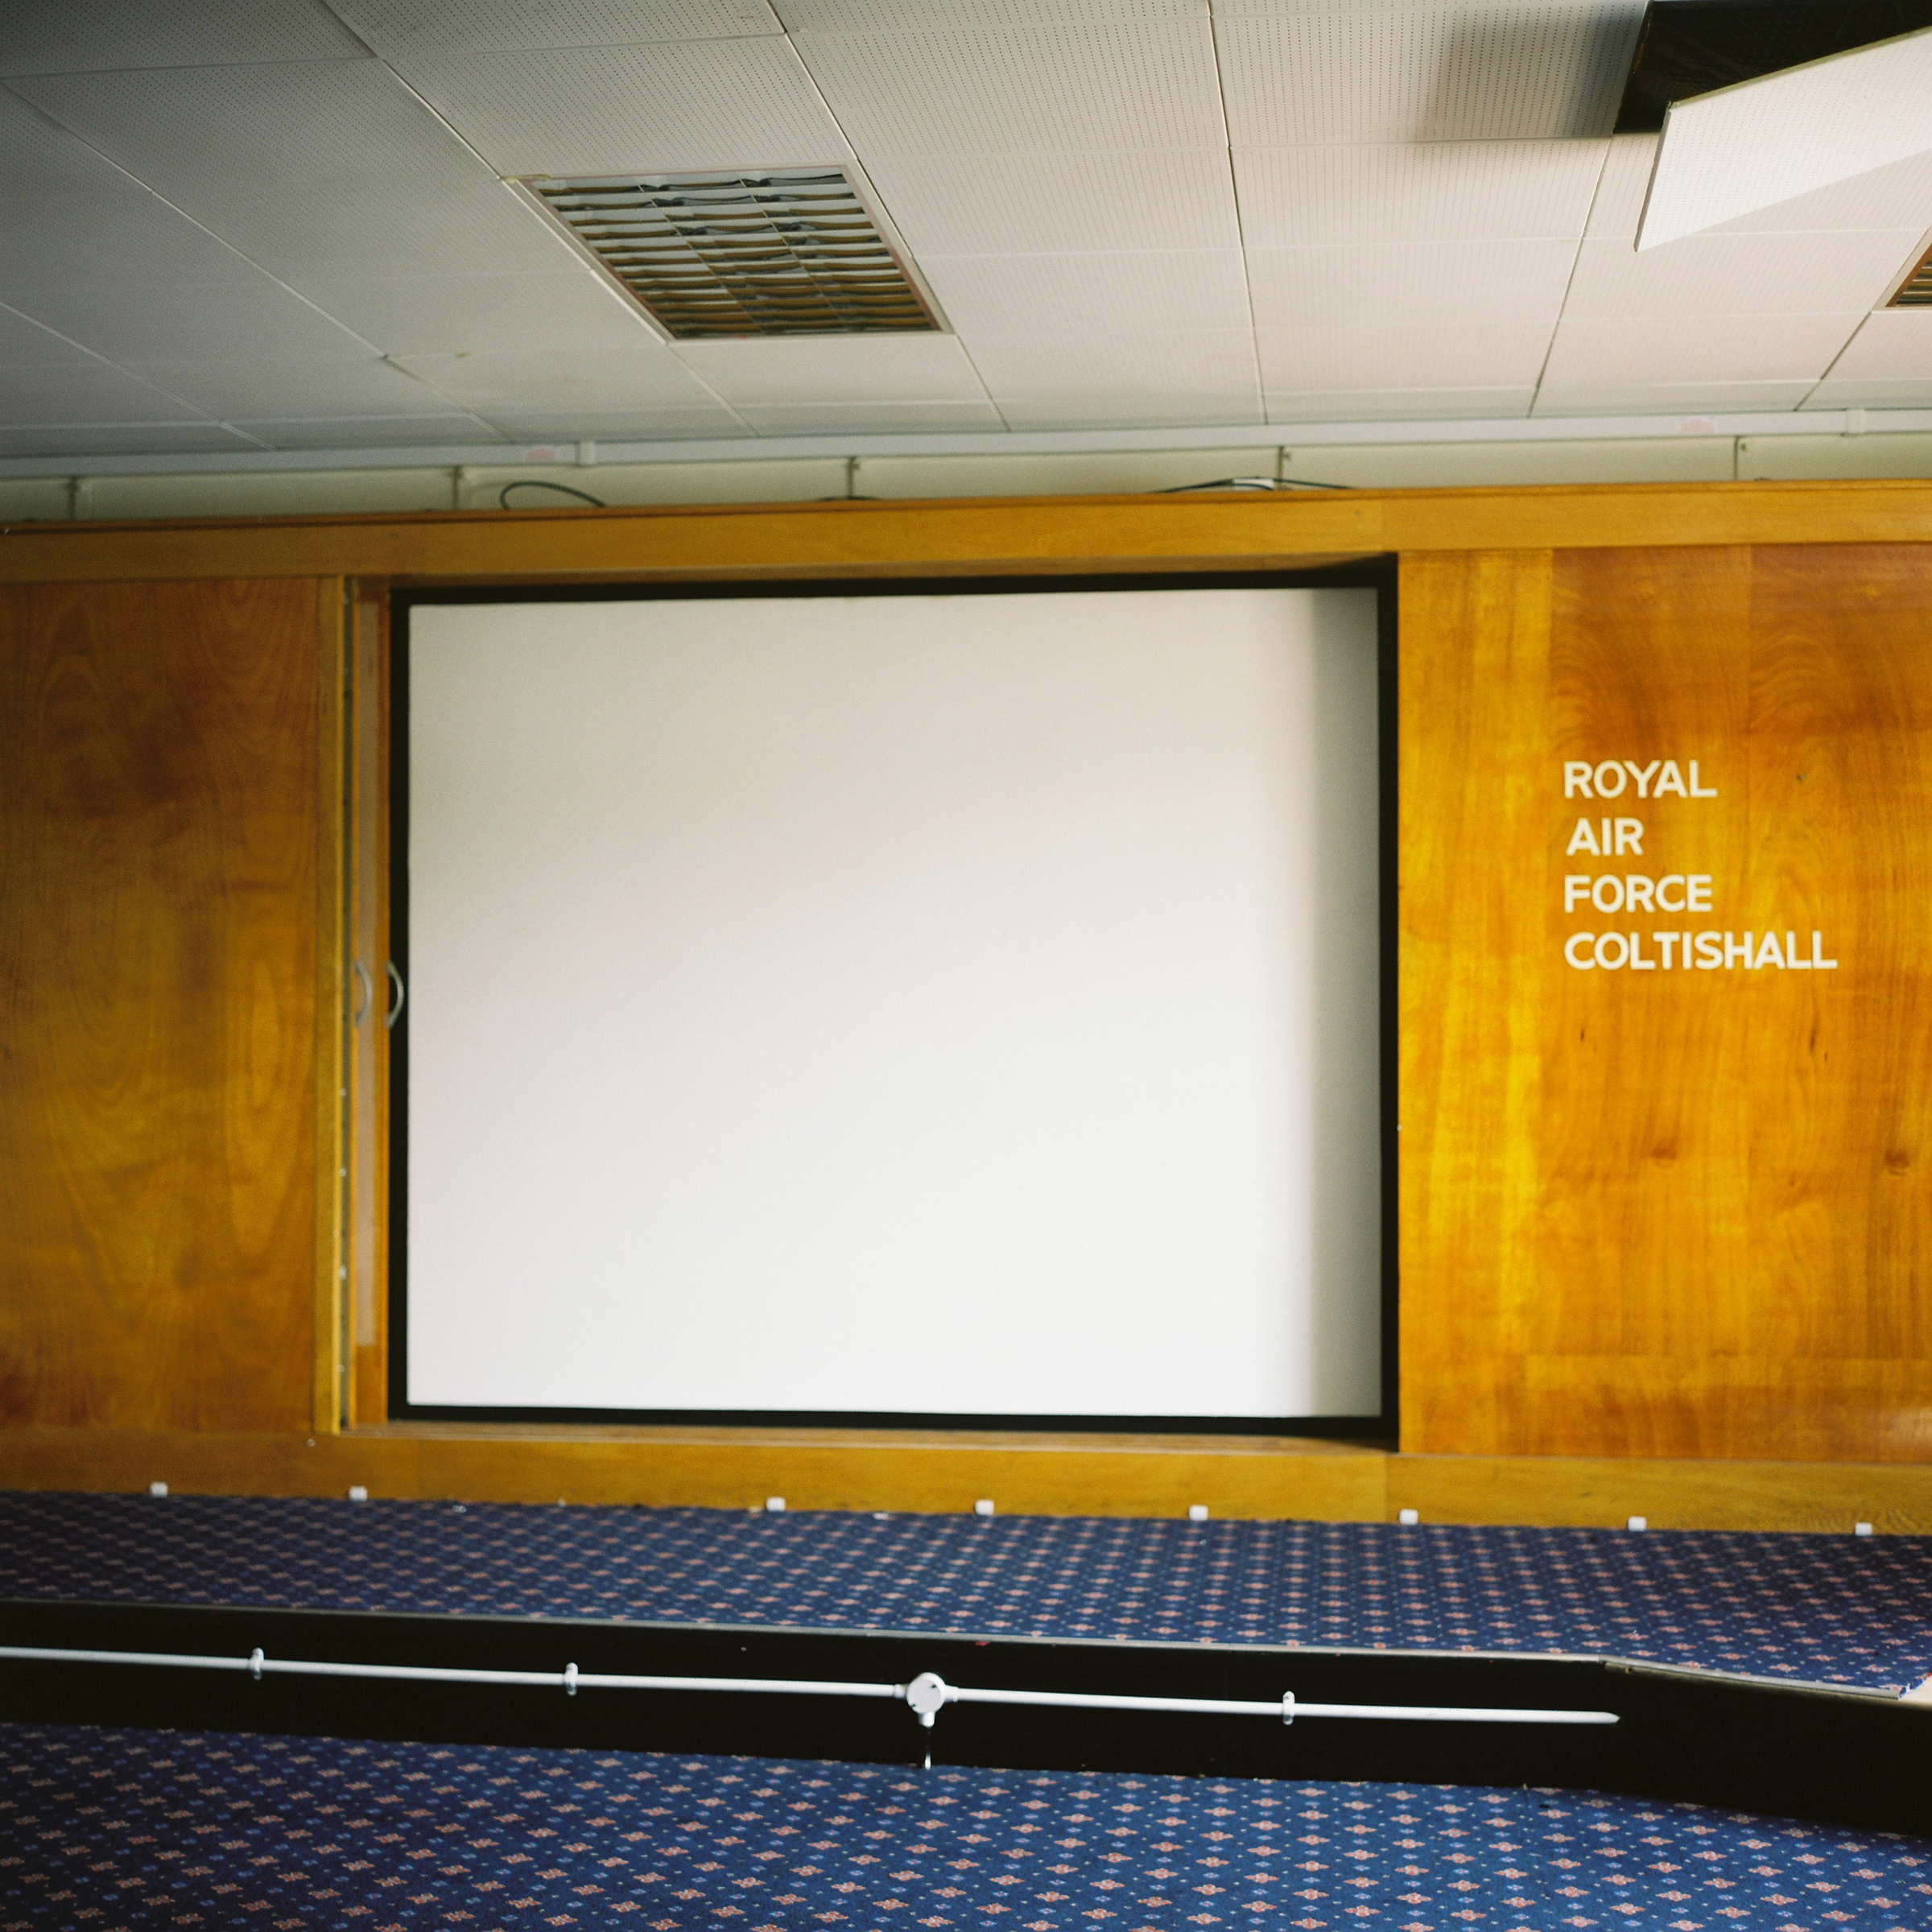 Projector screen set into wooden panelling with blue carpet